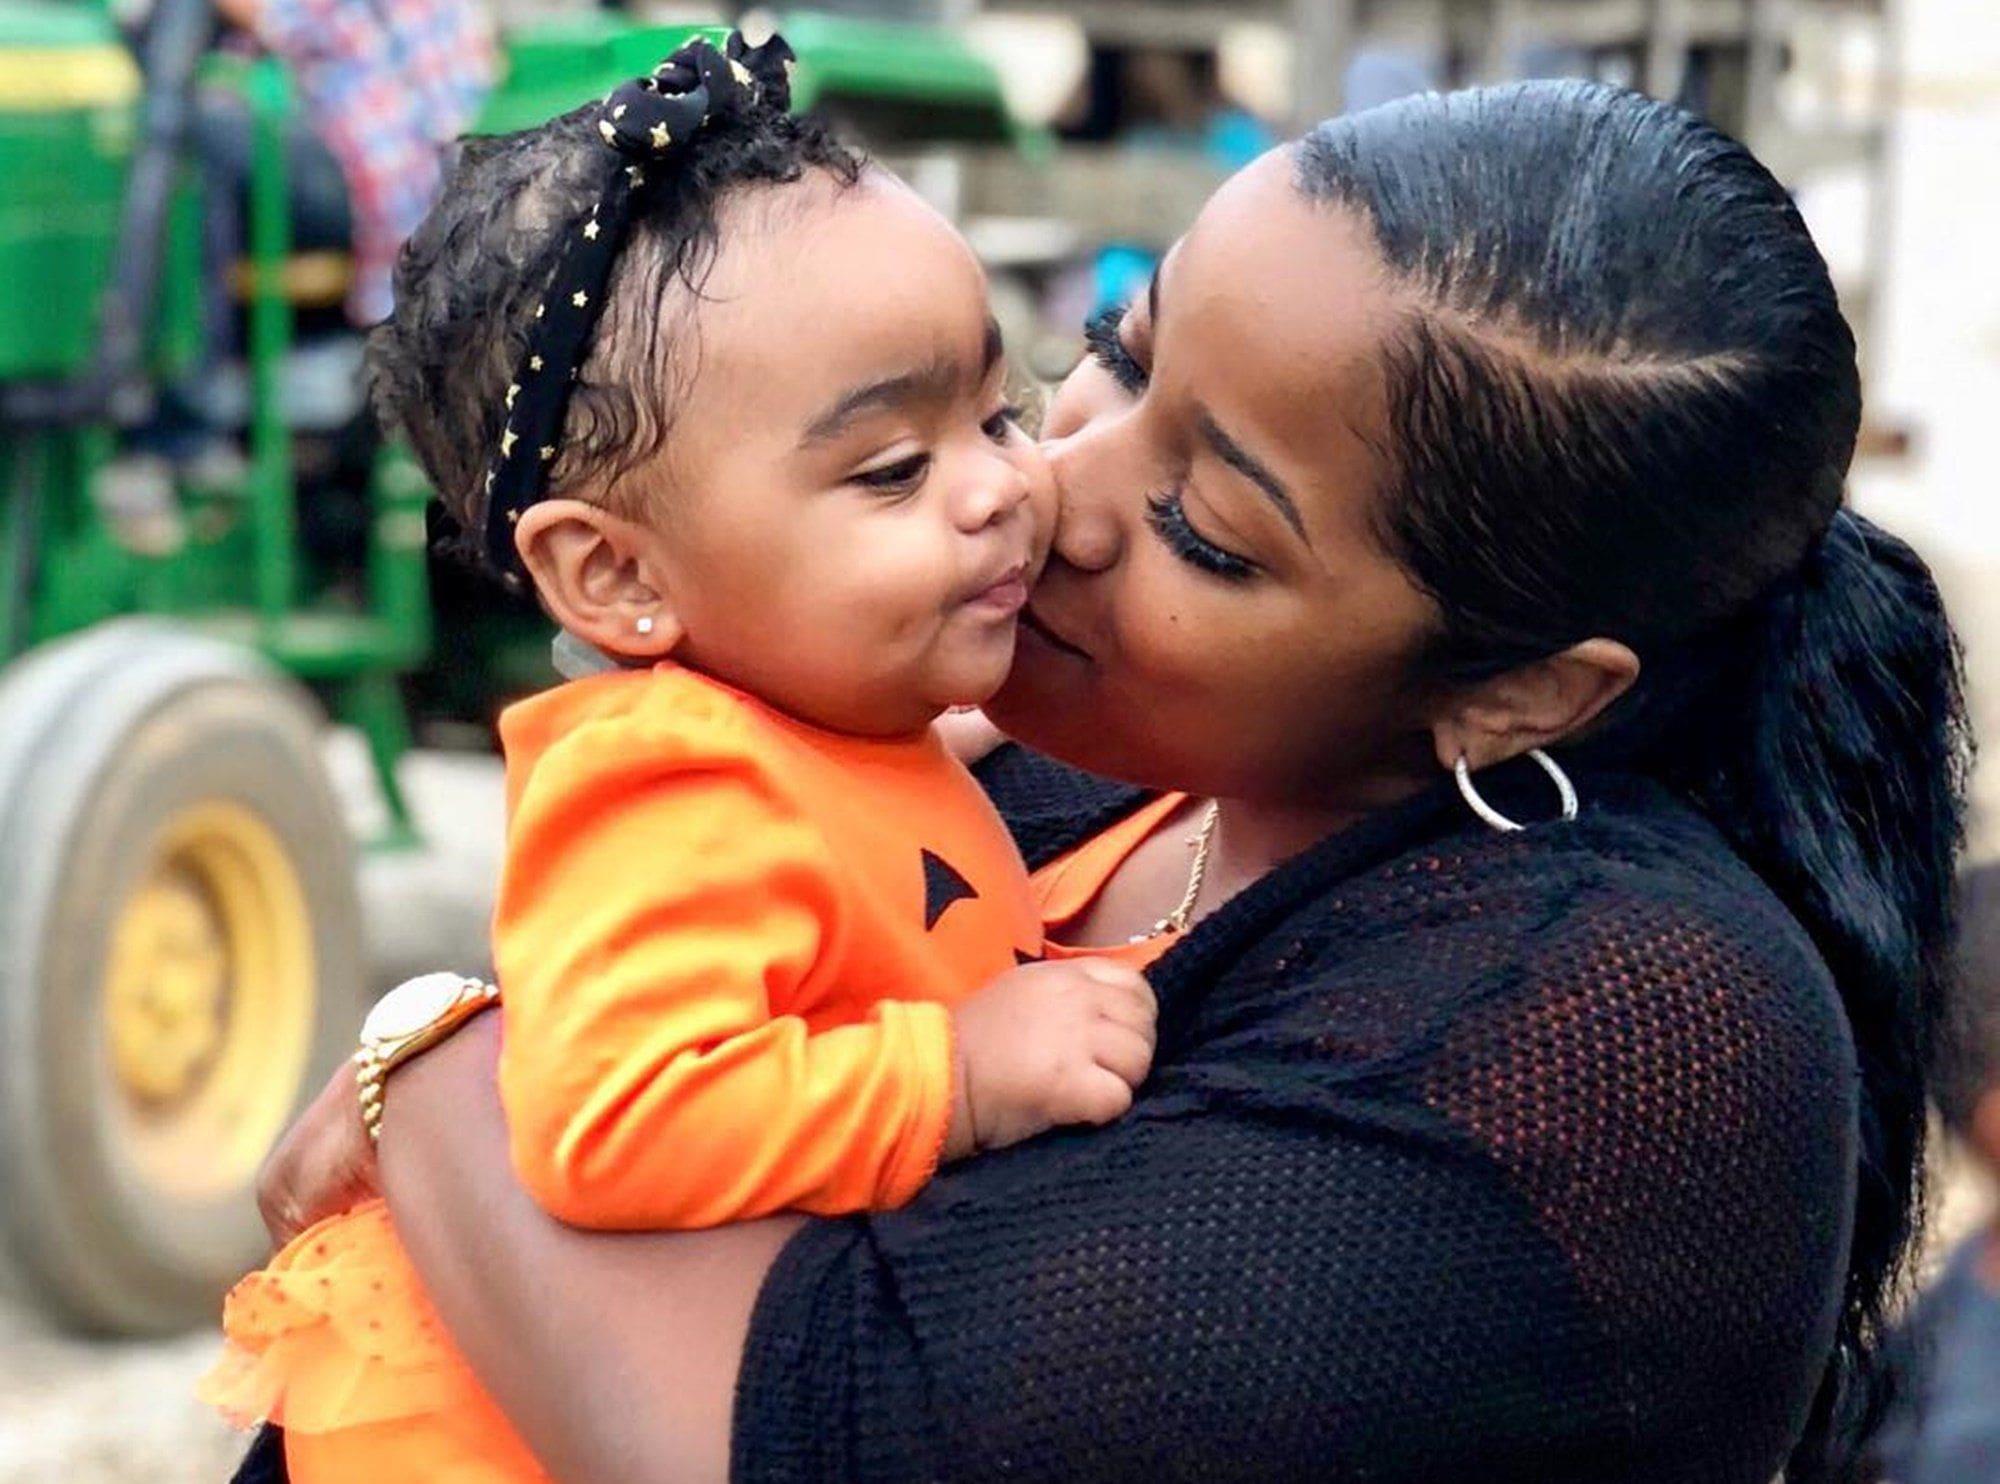 Toya Johnson's Photo Session Featuring Baby Reign Rushing Has Fans In Awe